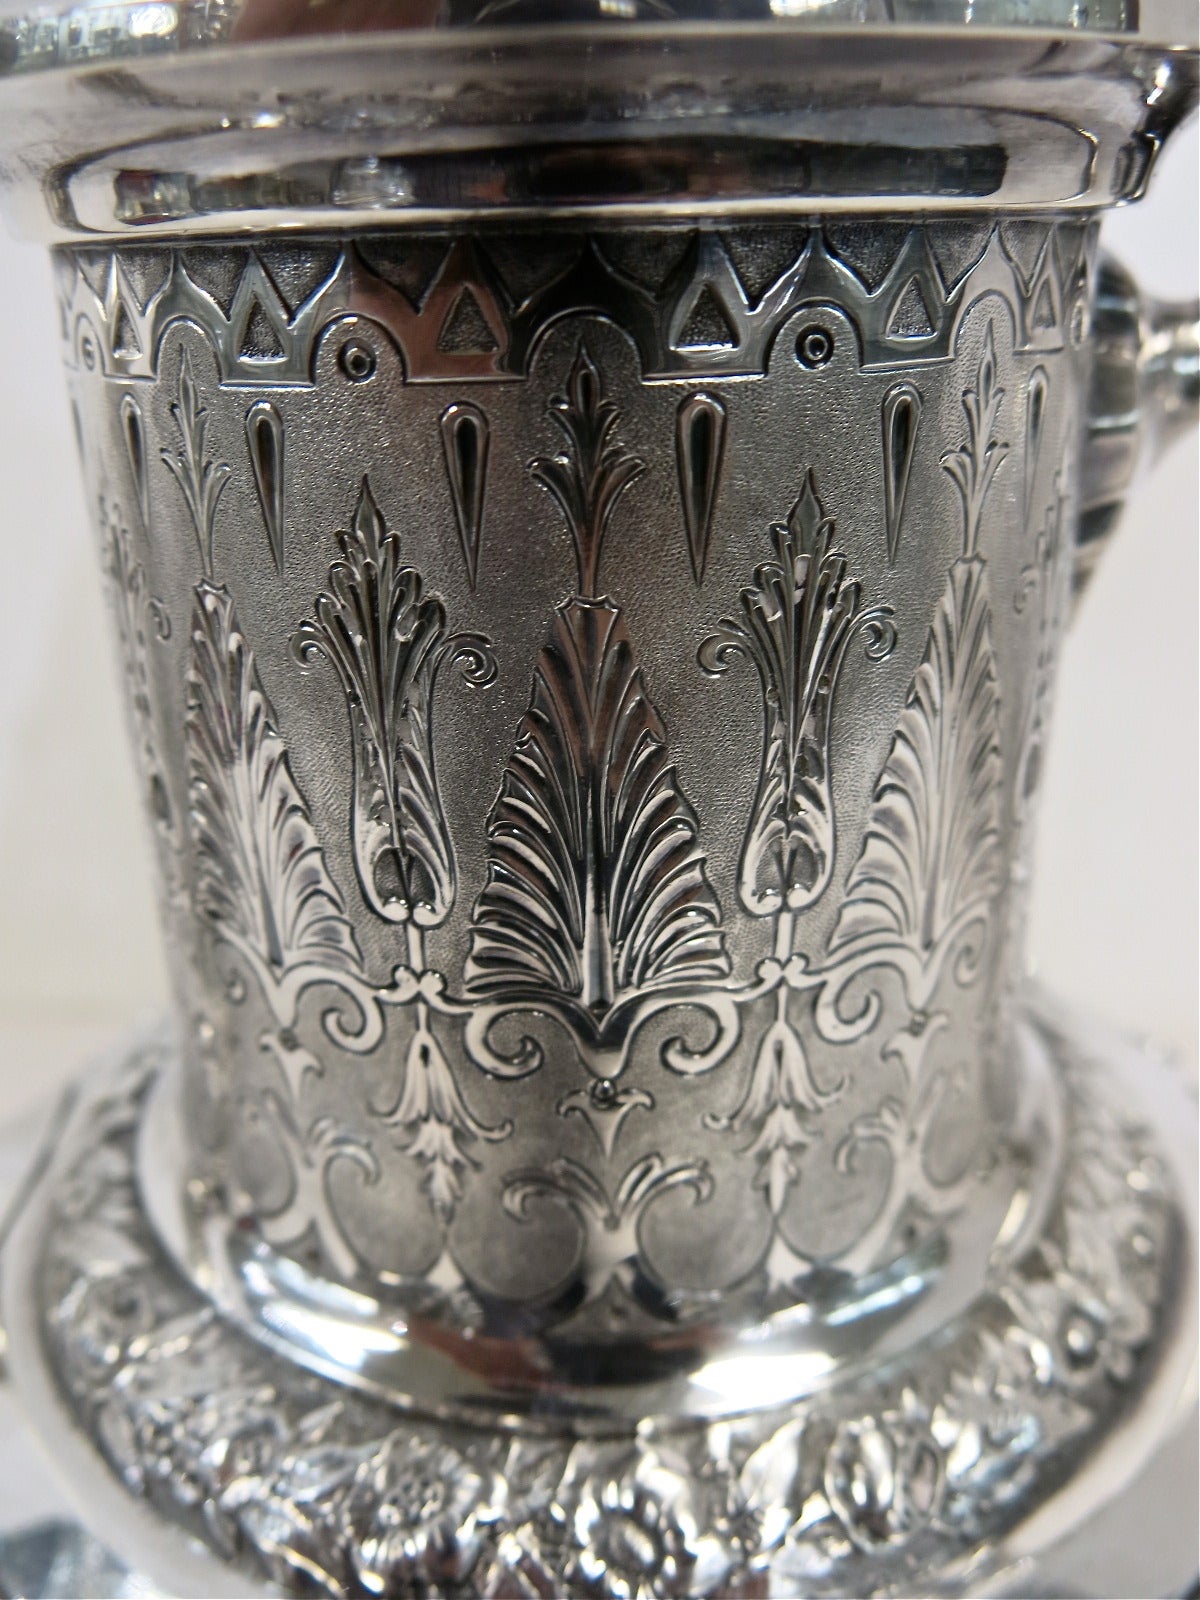 Antique Sterling Silver Scottish Coffee Pot. Victorian, Dated 1864. Made By William Marshall, Edinburgh. Very Unusual Design With Hand Chased & Engraved Decoration Throughout & Stippled Work On All The Plain Surfaces Give This Coffee Pot An Amazing